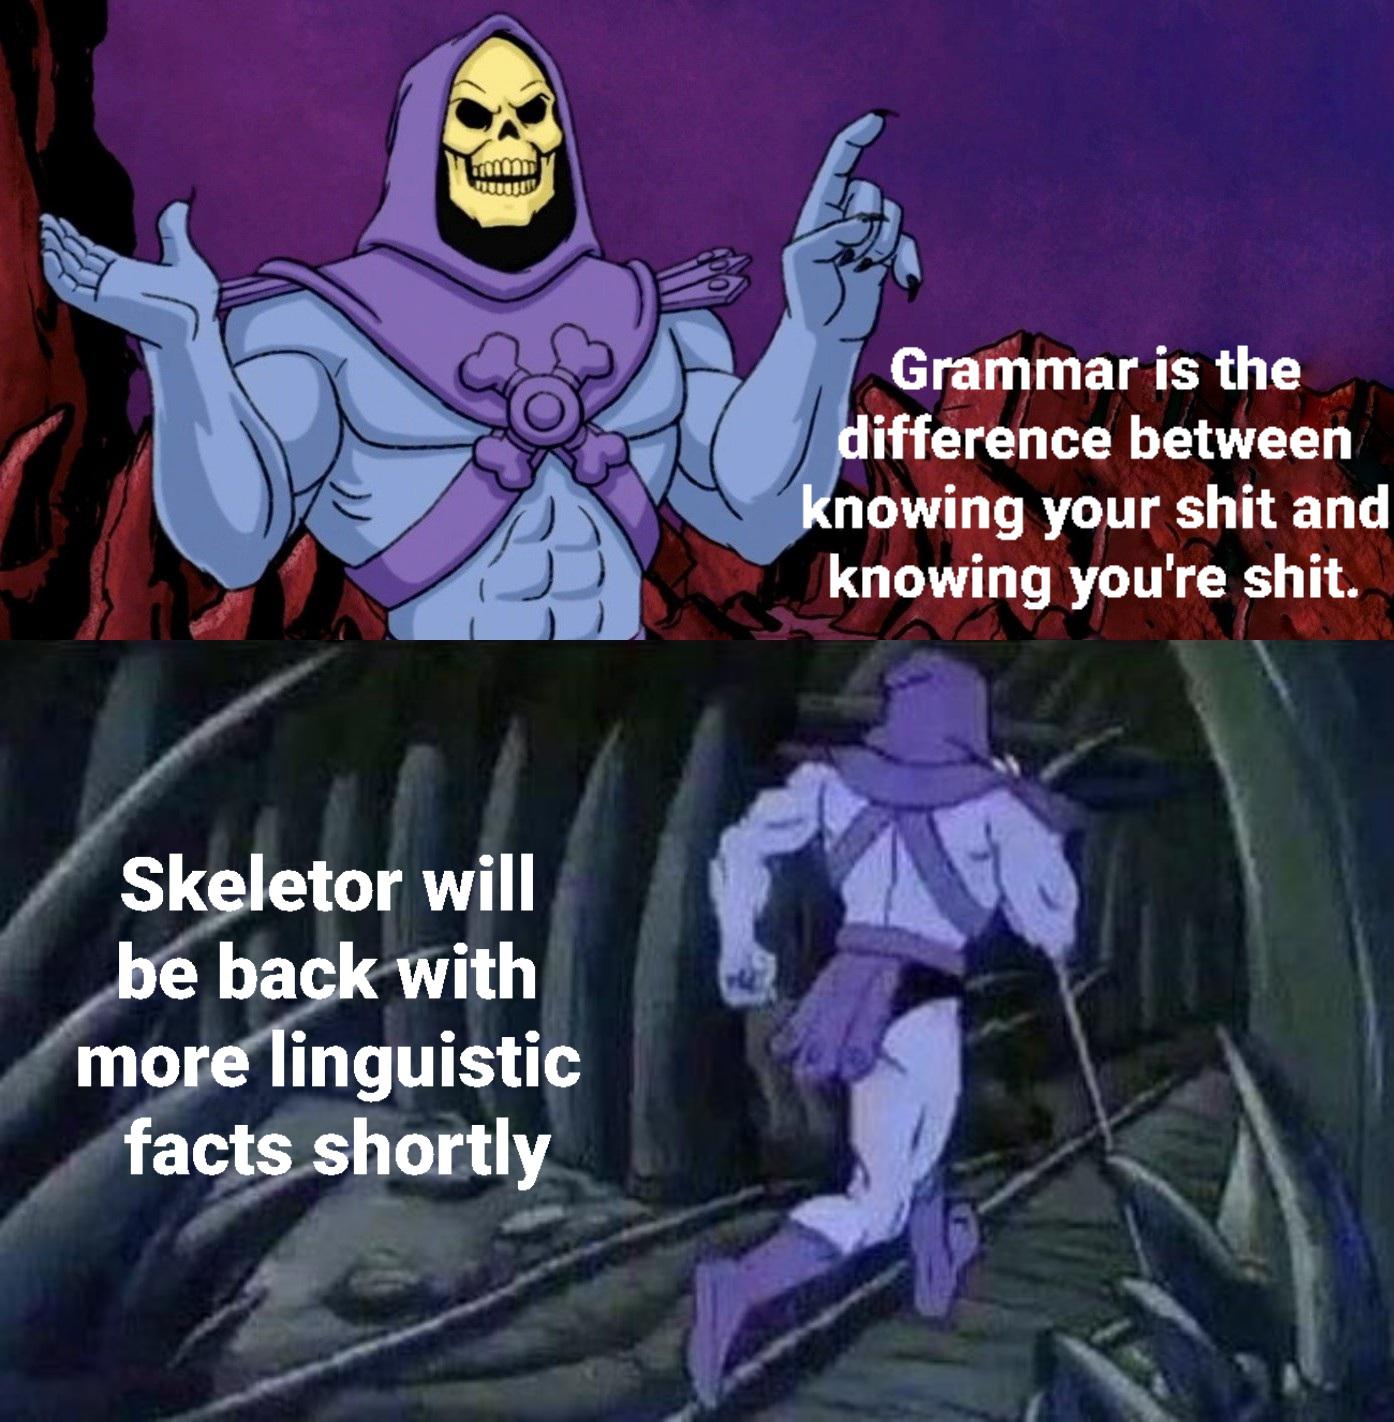 funny memes - dank memes - cartoon - Skeletor will be back with more linguistic facts shortly Grammar is the difference between knowing your shit and knowing you're shit.